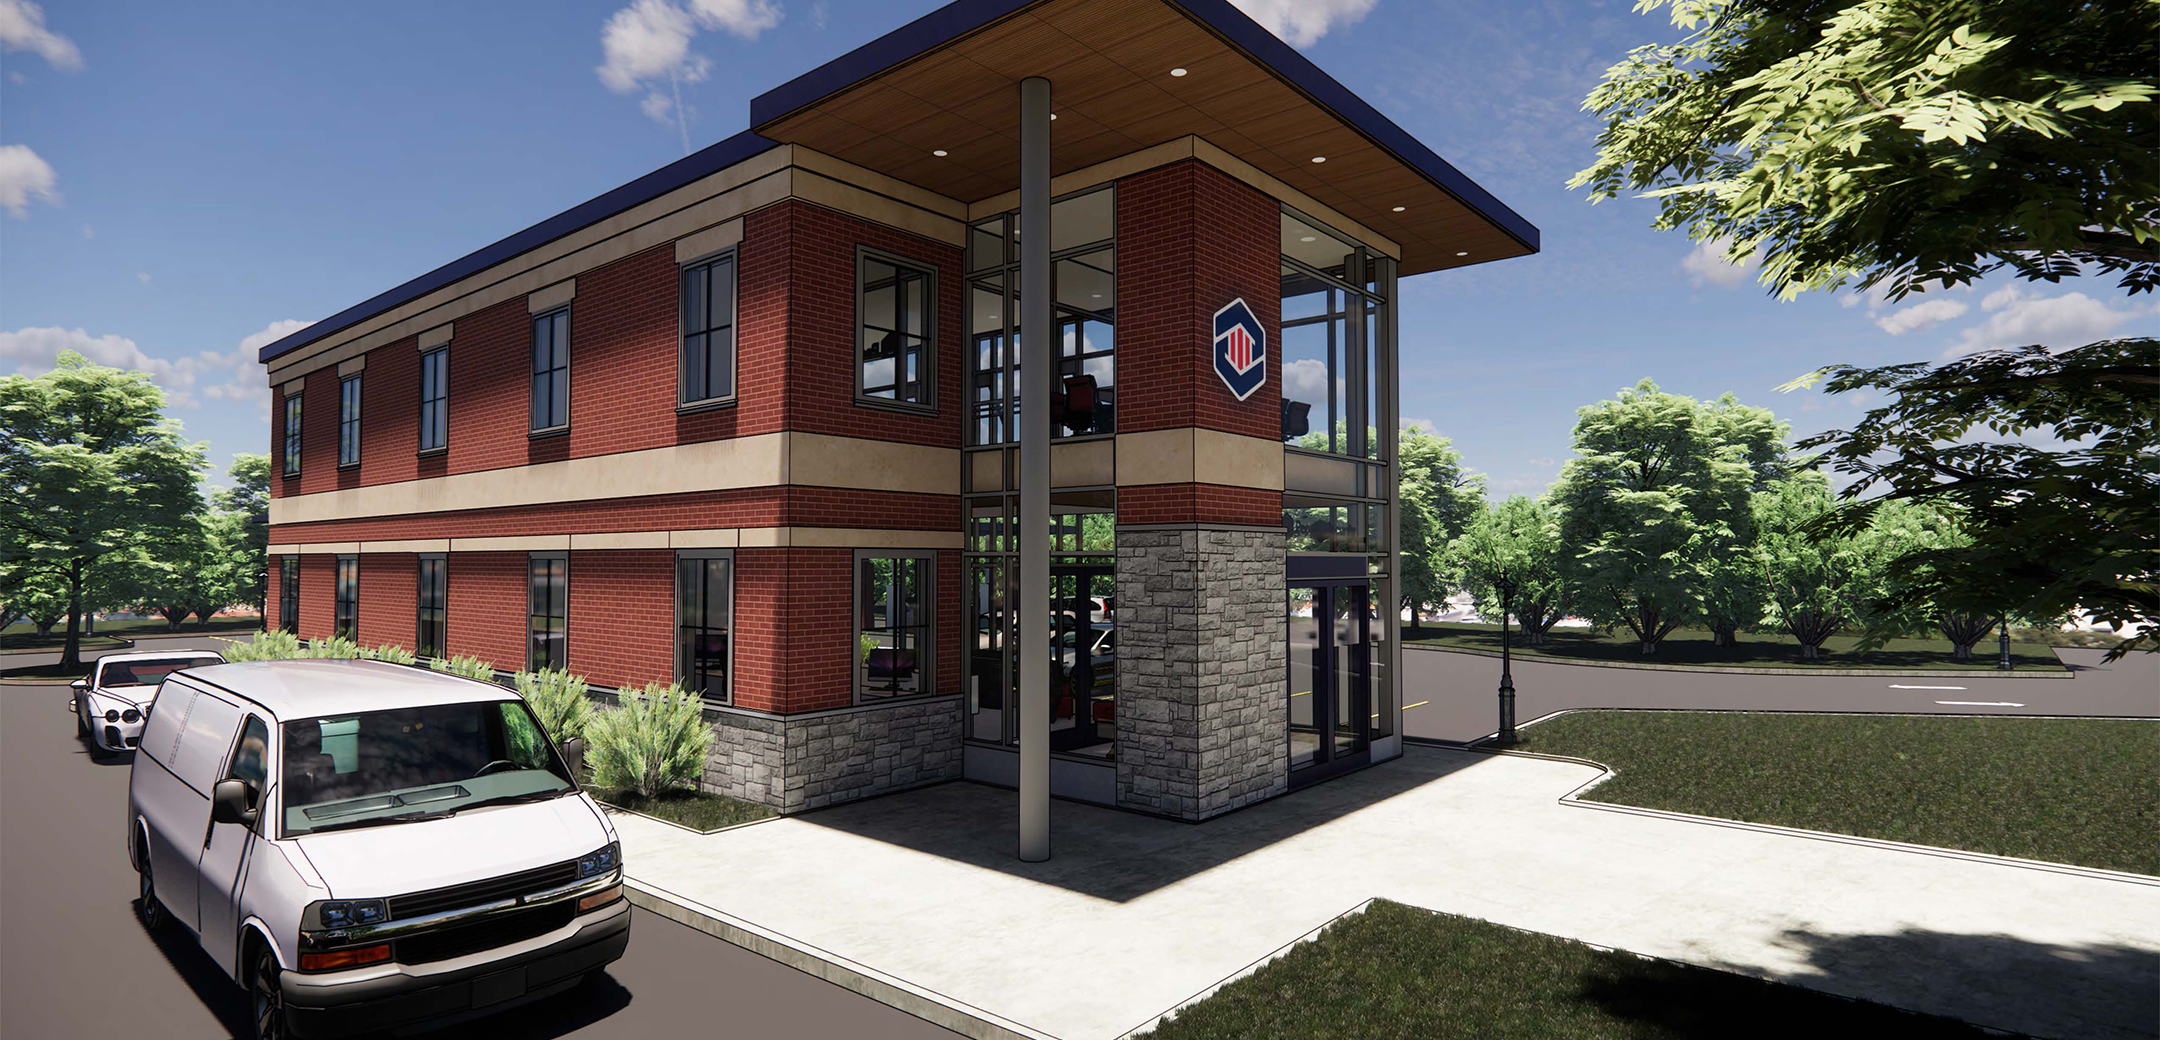 A rendering of the Peoples Security two story brick and stone building, showcasing the floor to ceiling glass wall accents, front parking lot and driveway wrapping around the building.